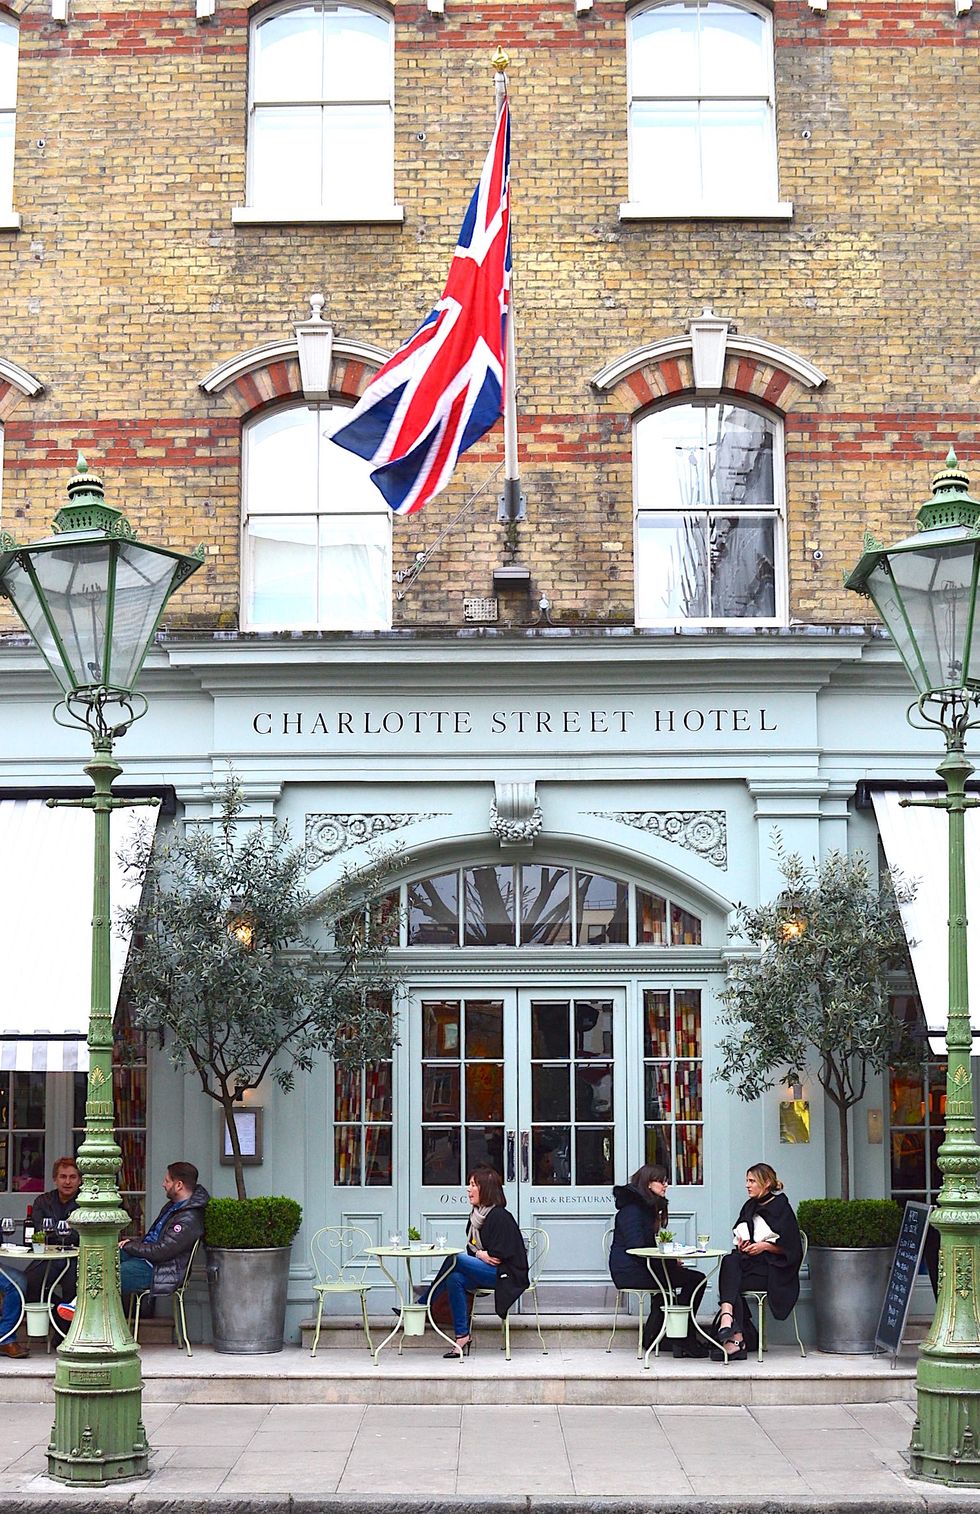           The Charlotte Street Hotel is situated just north from the vibrant Soho, in the adorable area of Fitzrovia. It's outdoor patio and chic clientele make it the perfect spot for after work cocktails.